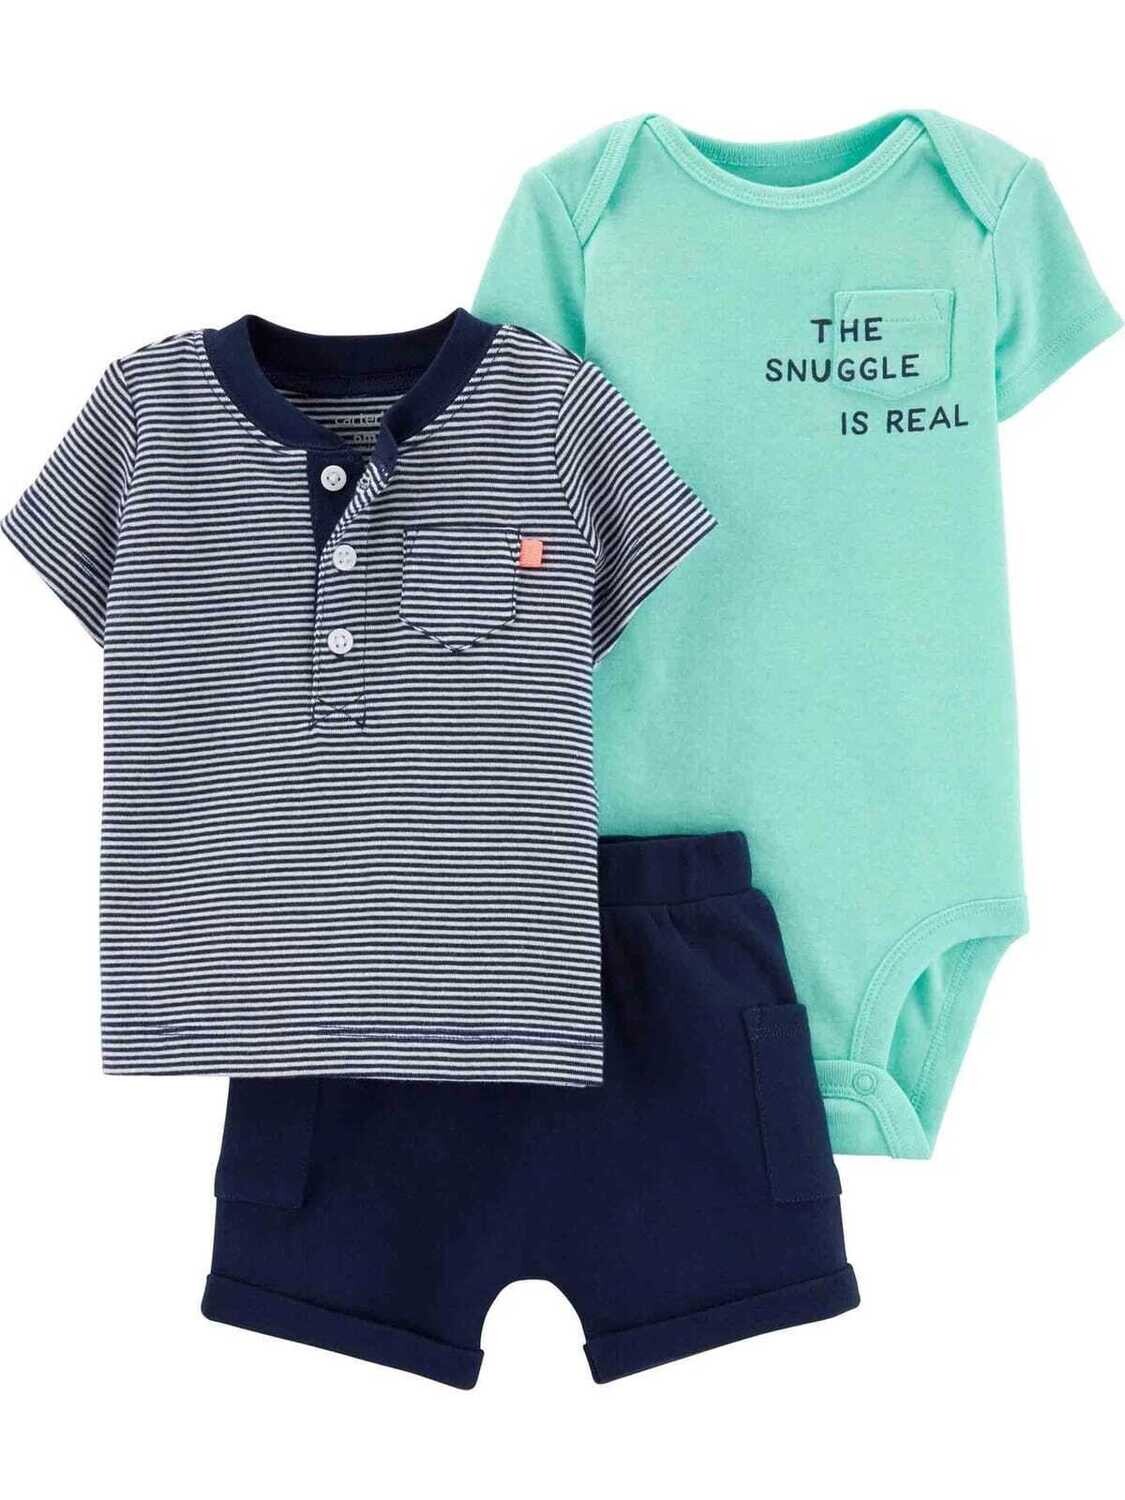 Original Carter's Baby Boy The Snuggle is Real 3-Piece Short Set